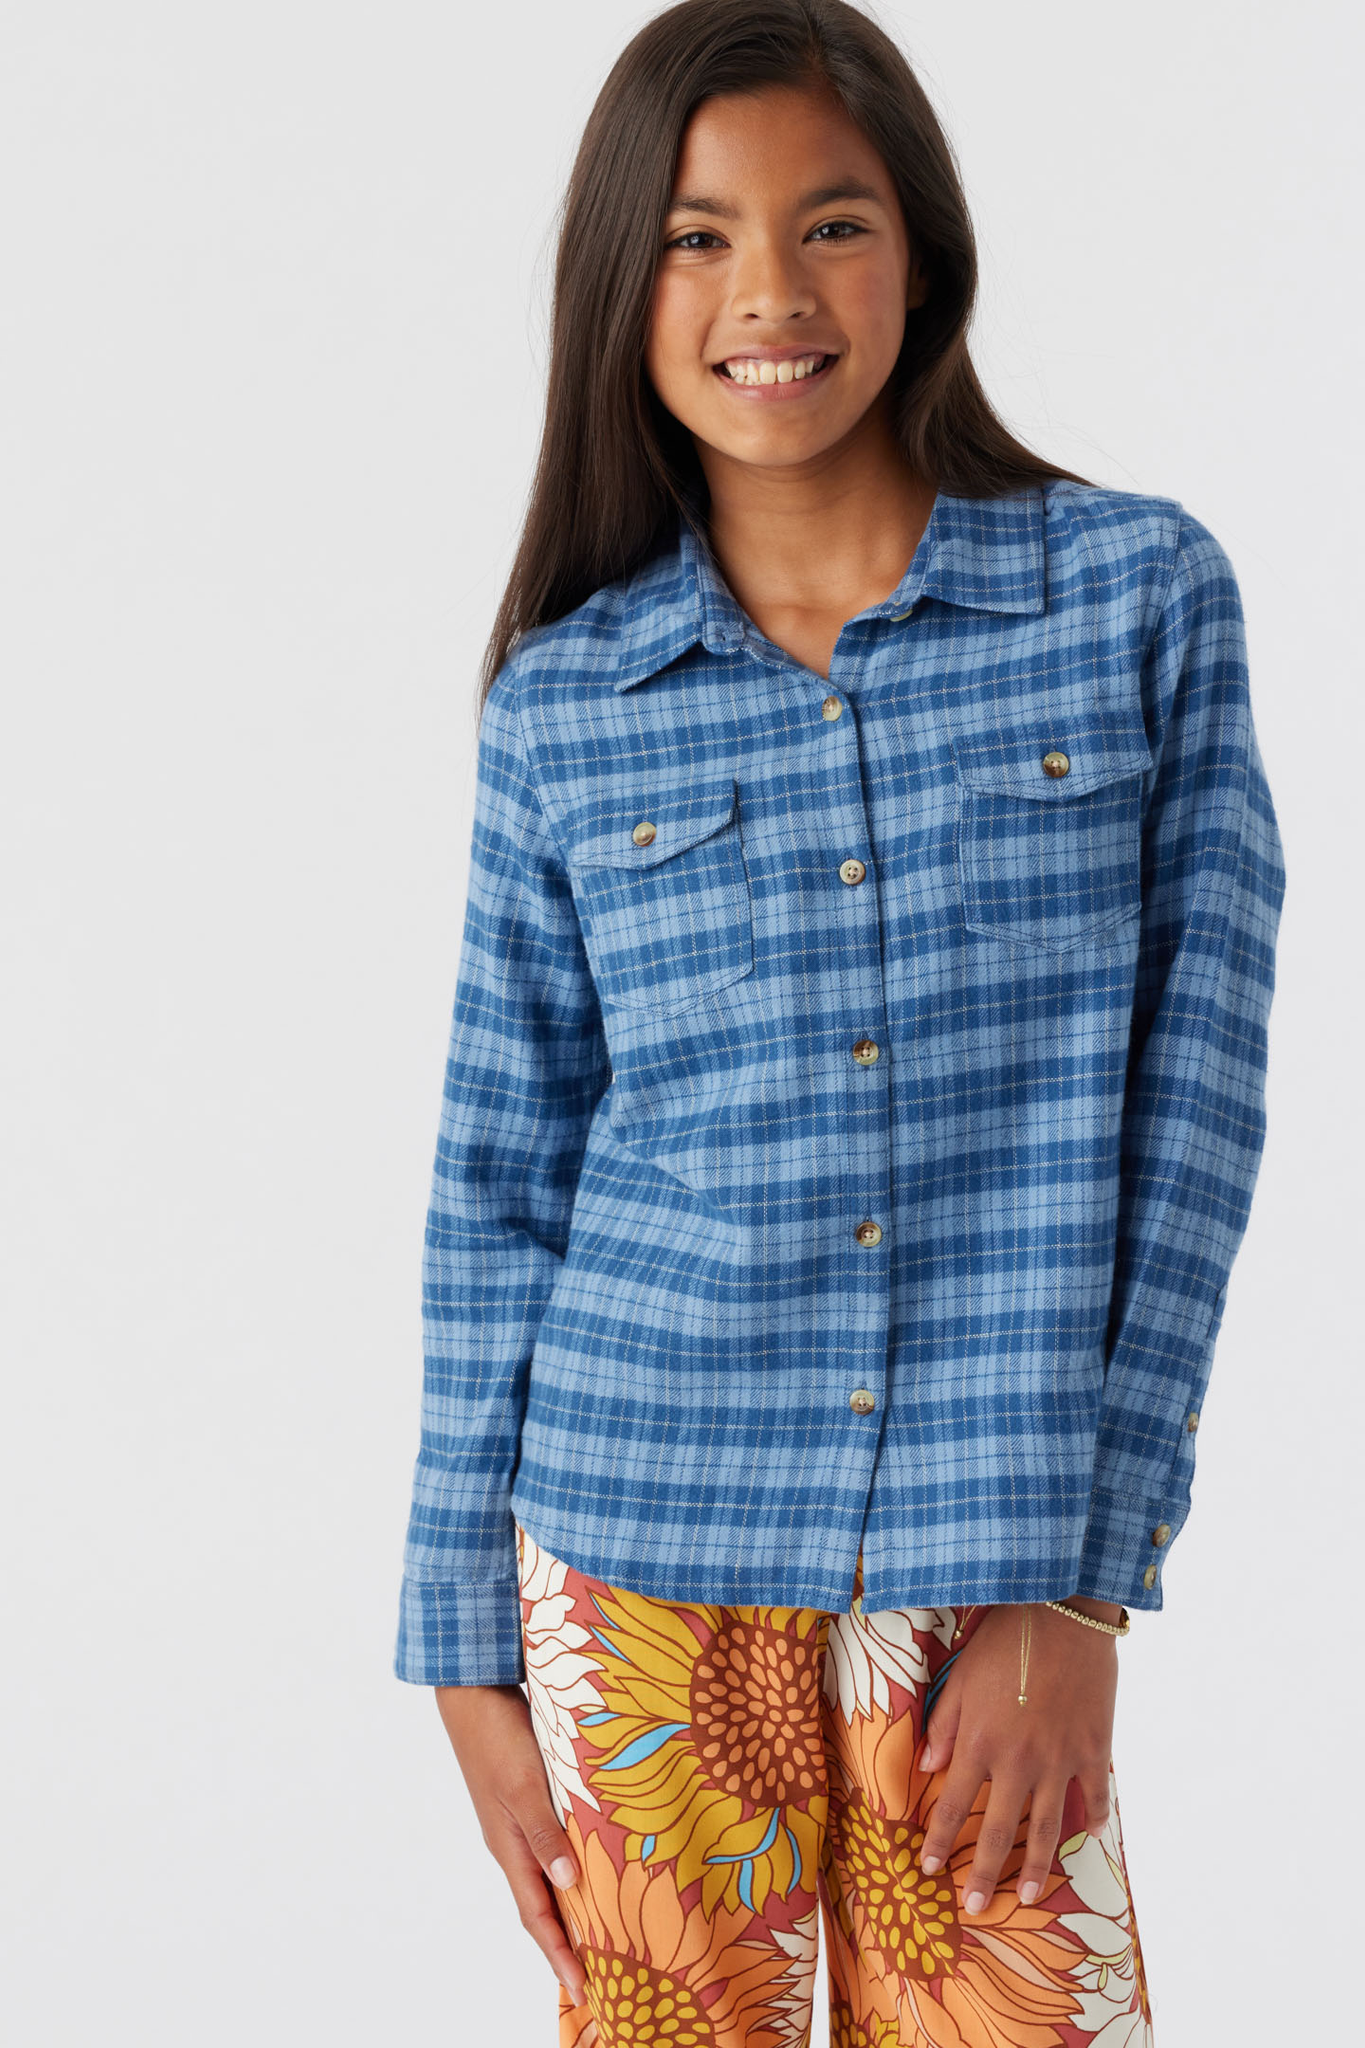 GIRL'S LONNIE FLANNEL